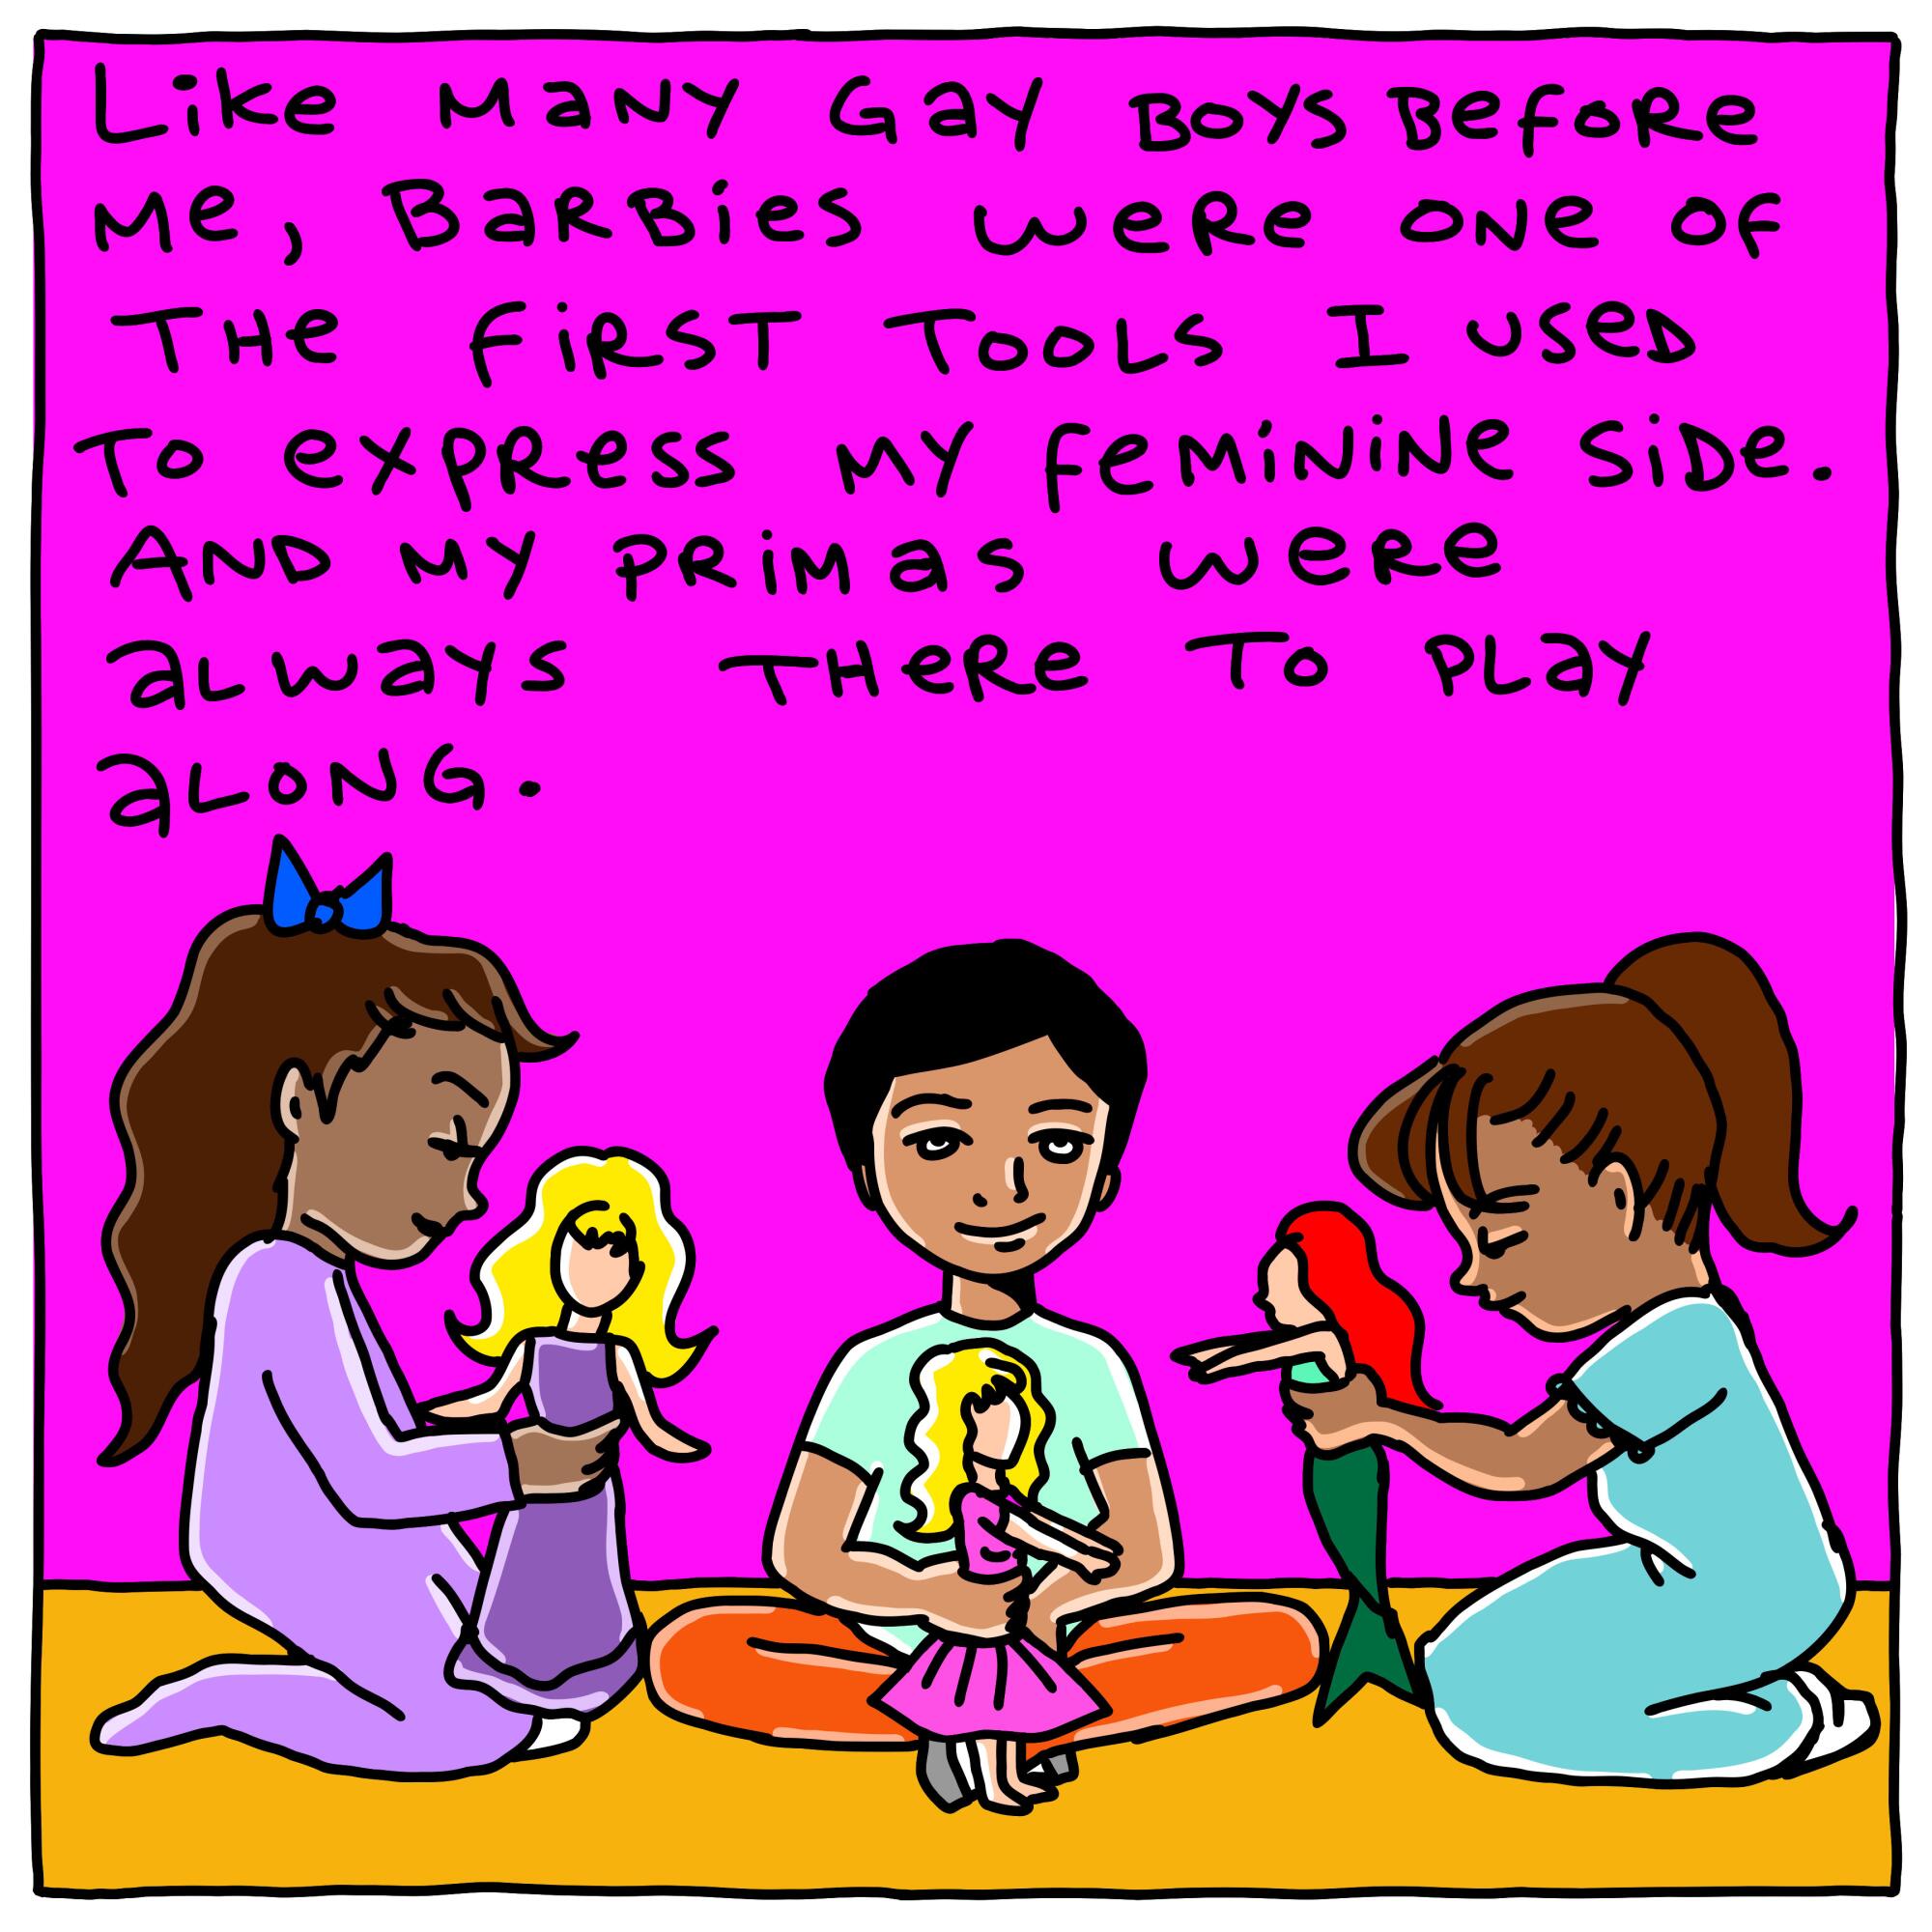 Kids with Barbies and Like many gay boys before me, Barbies were one of the first tools I used to express my feminine side. 